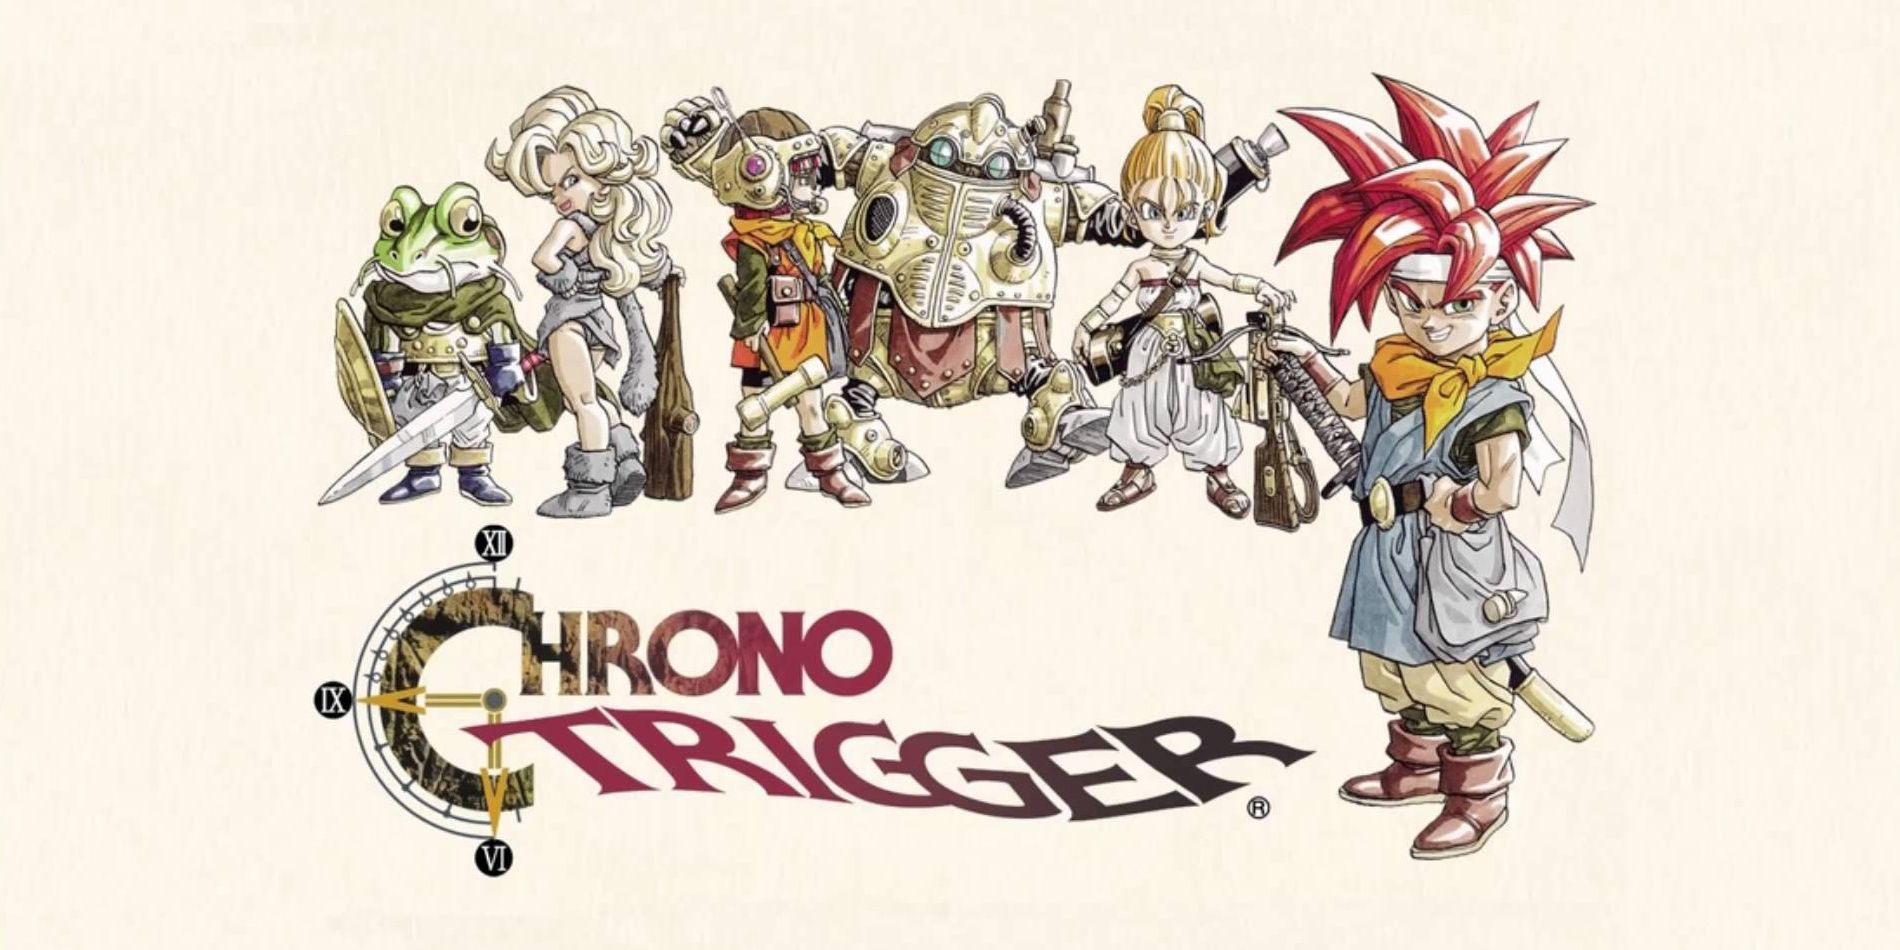 Chrono Trigger OST key art featuring the hero and his supporting cast.